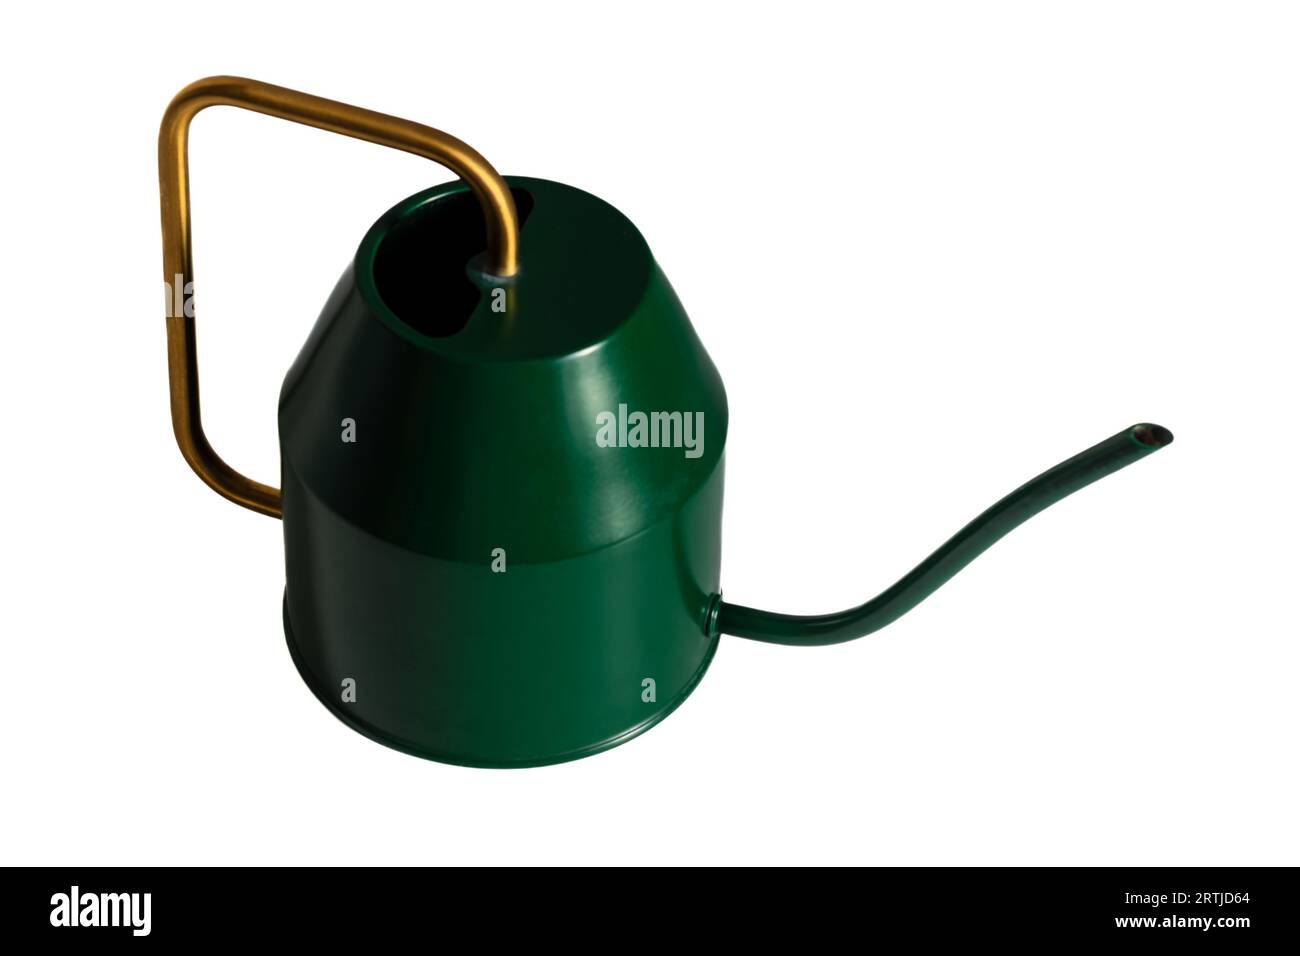 Decorative green watering can with a yellow handle for watering indoor flowers on a white background. Stock Photo